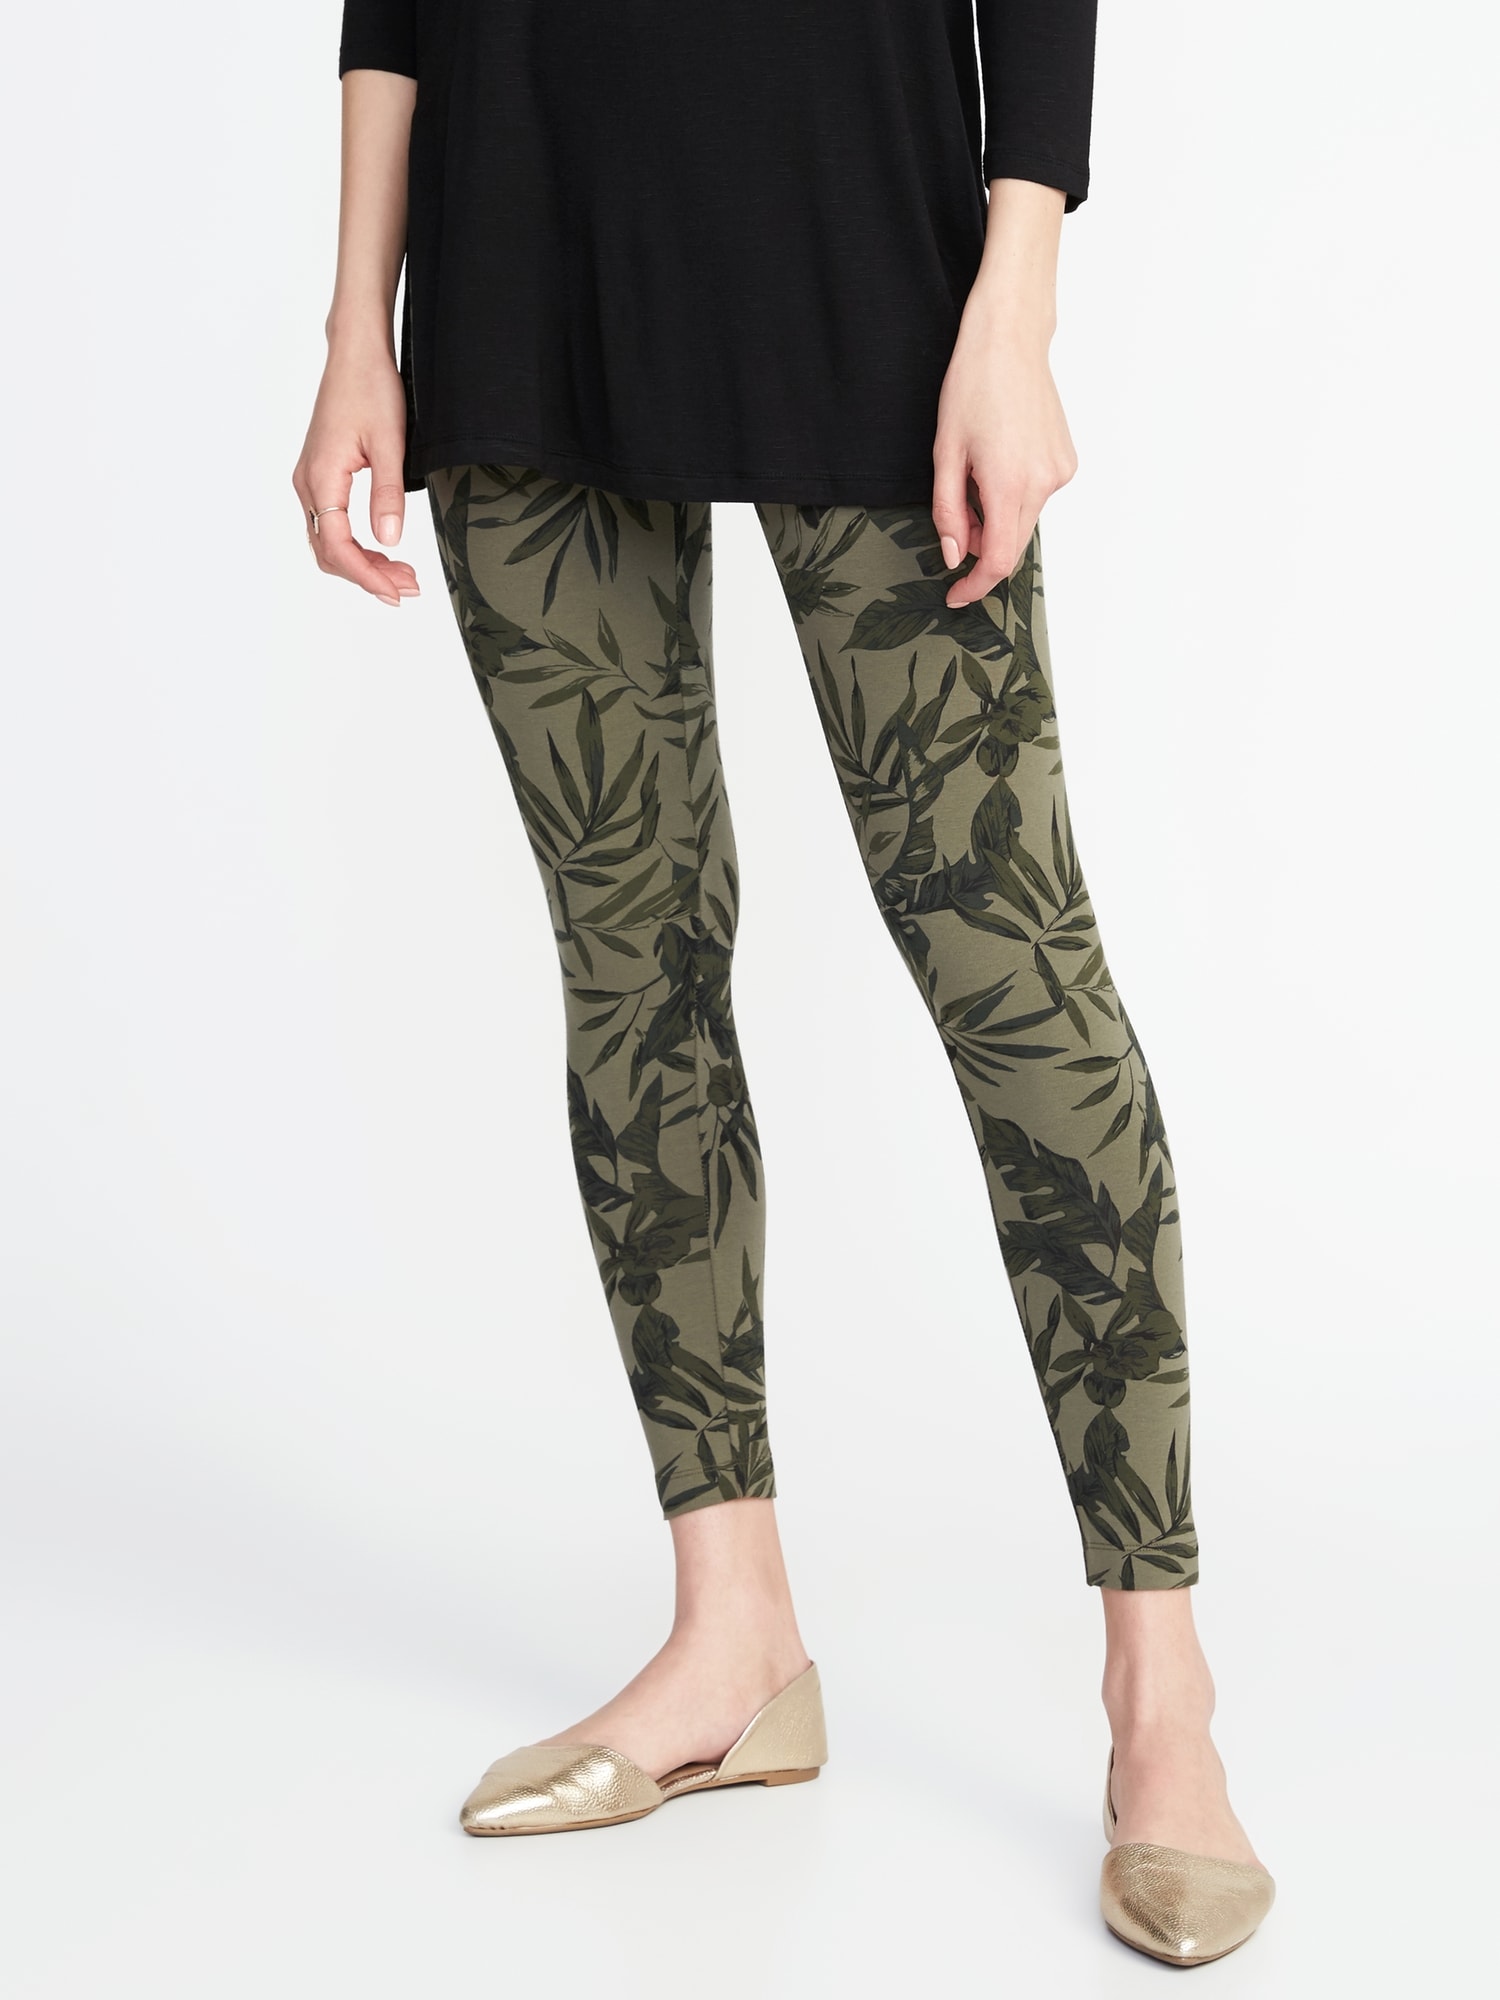 SA Exclusive Patterned Leggings  Patterned leggings, Latest fashion  clothes, High quality leggings